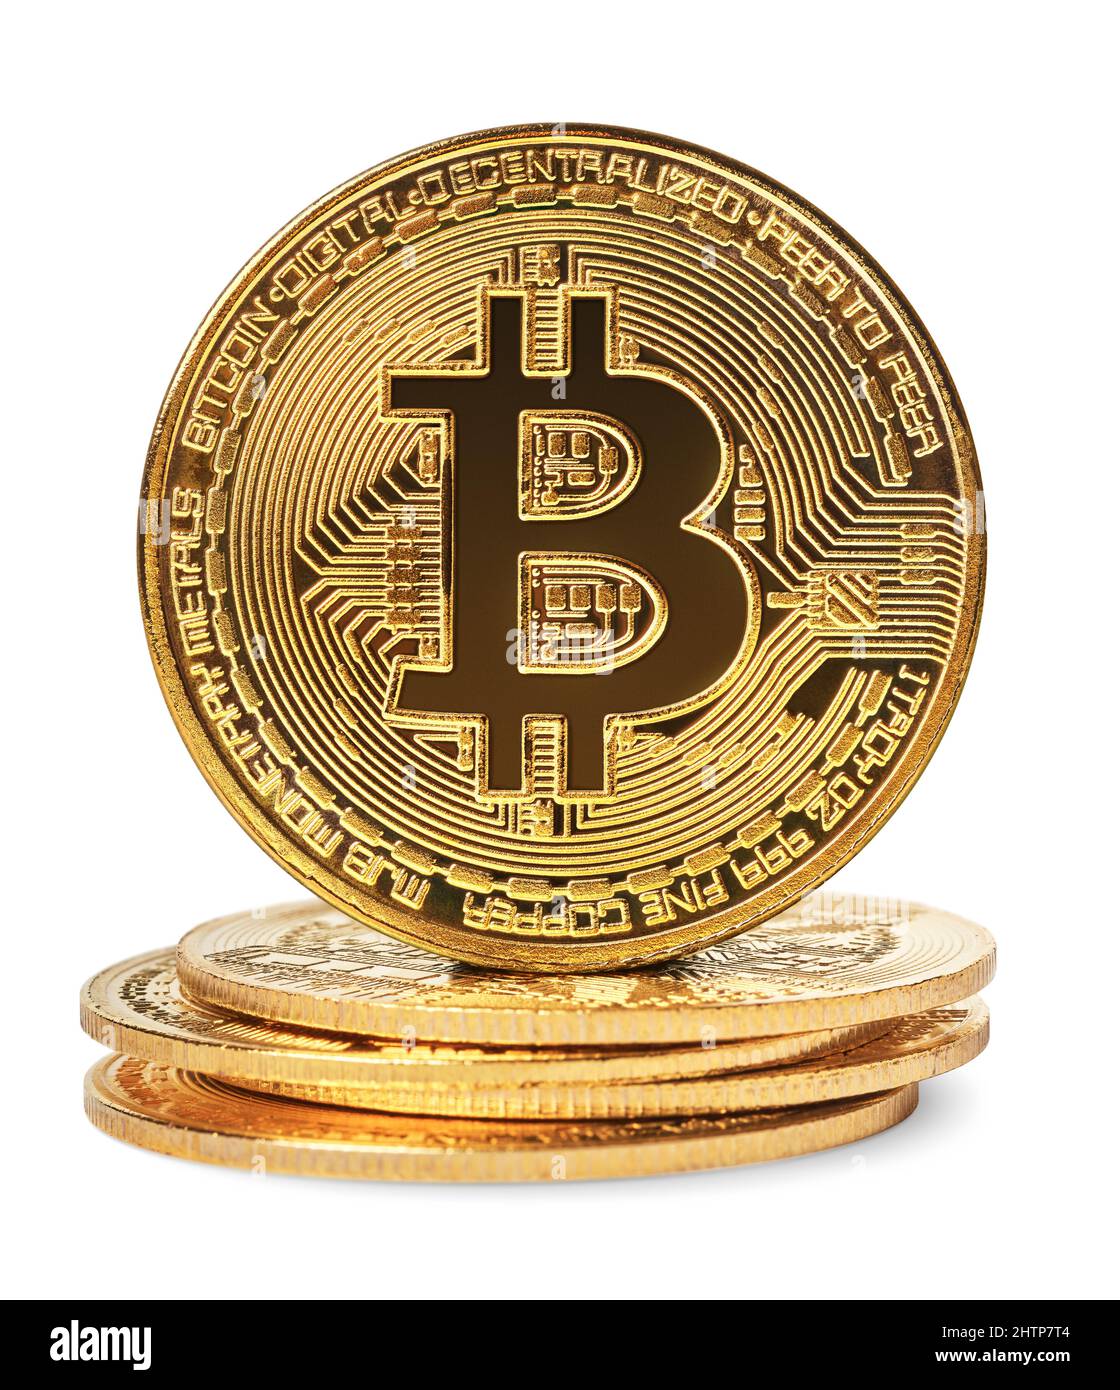 Isolated objects: group of golden bitcoin coins, on white background Stock Photo